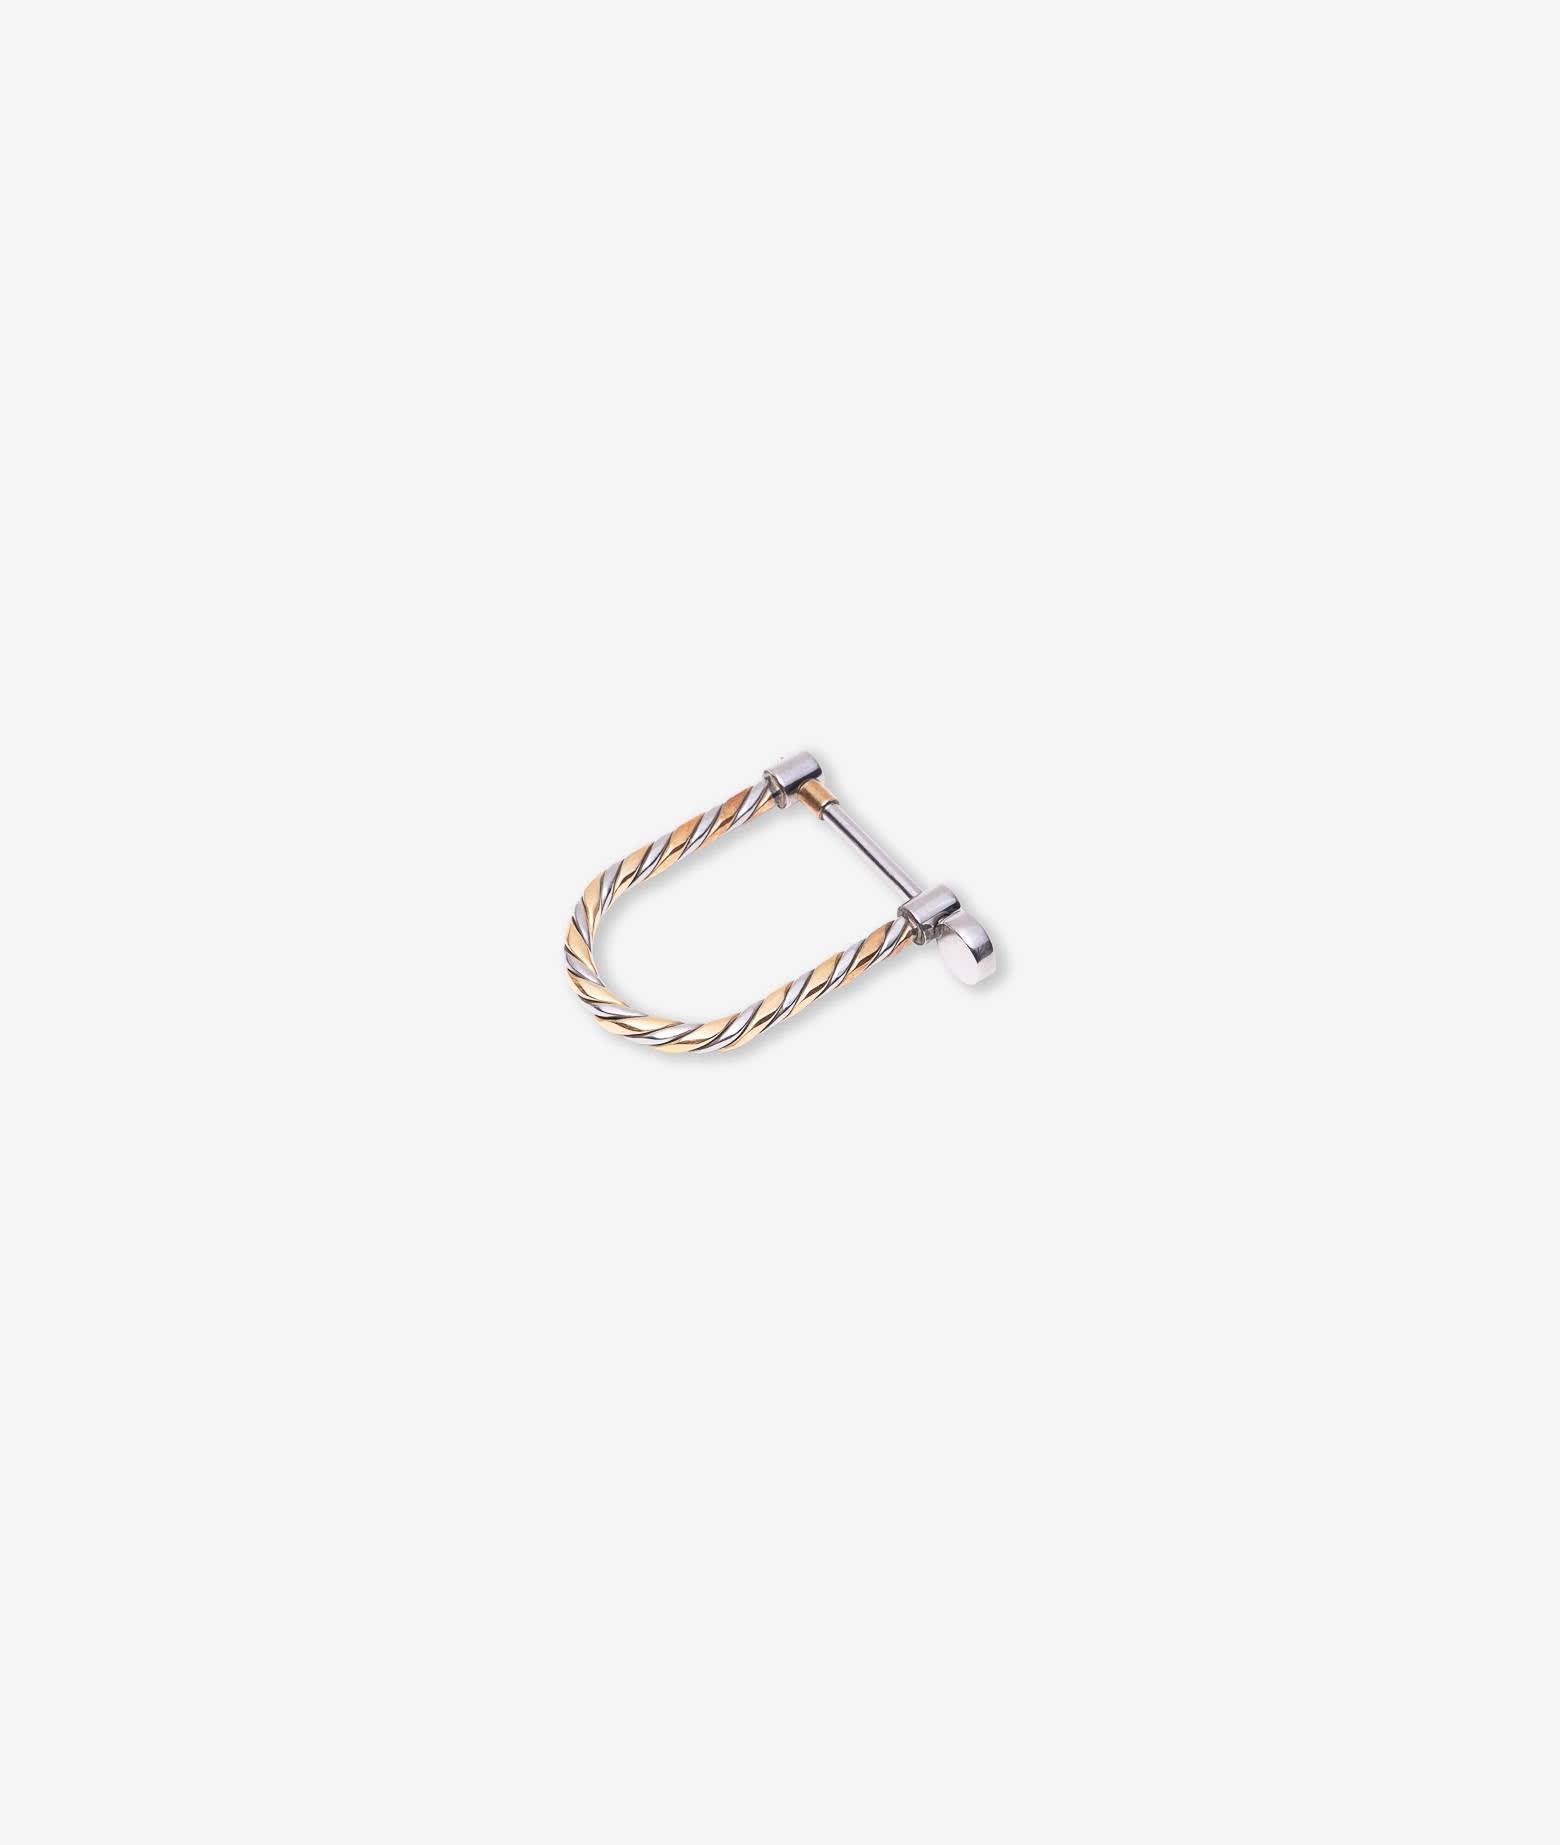 Stainless Steel And Yellow Gold Shackle Shaped Key Holder Keyring